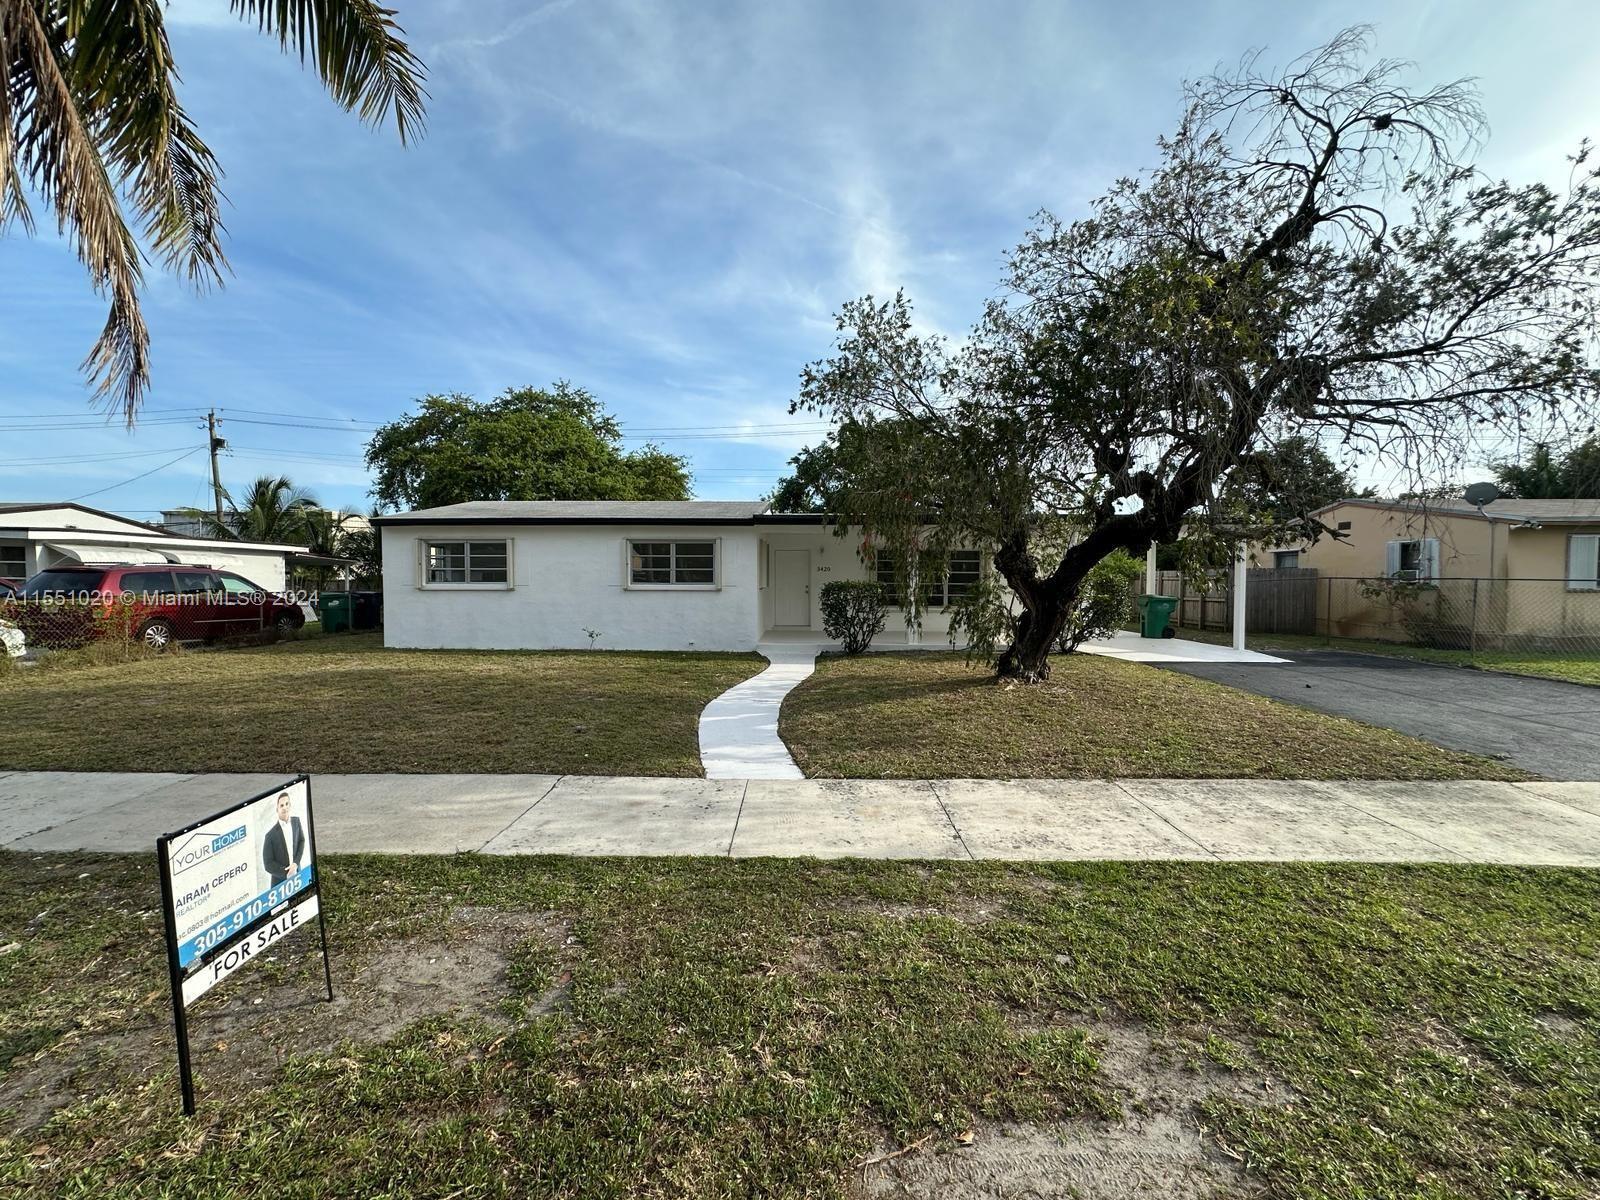 Photo of 3420 NW 169th Ter in Miami Gardens, FL